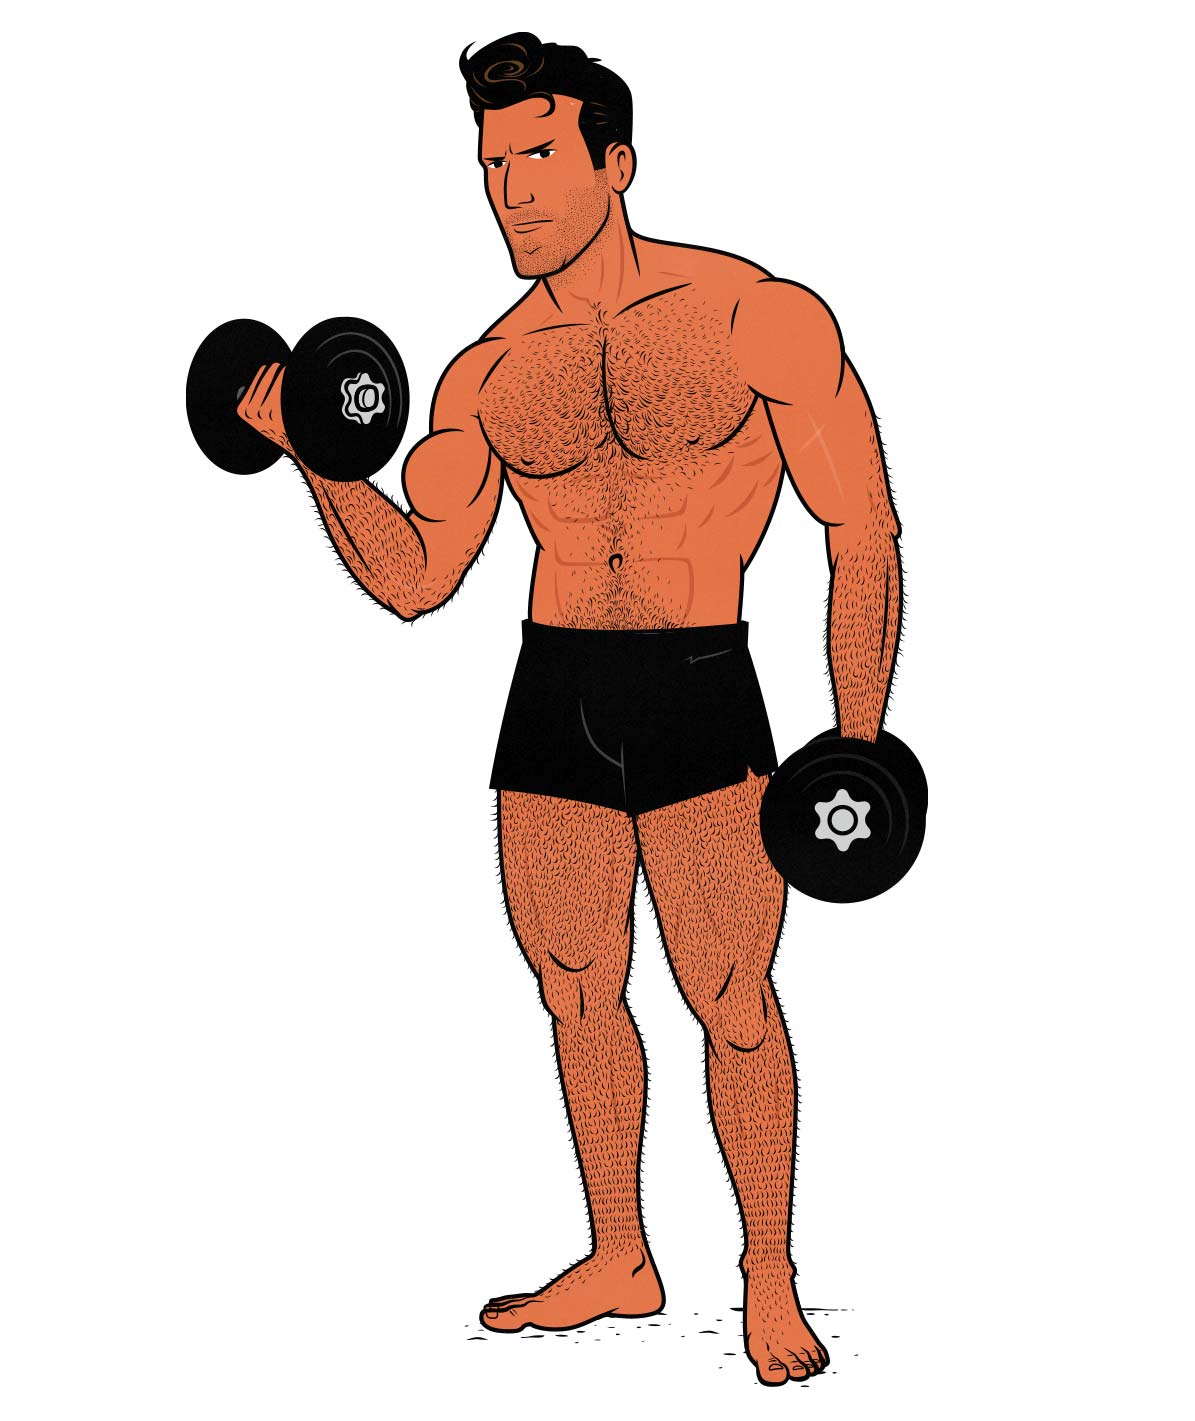 Cartoon illustration of a bodybuilder doing bicep curls to build muscle. Illustrated by Shane Duquette.